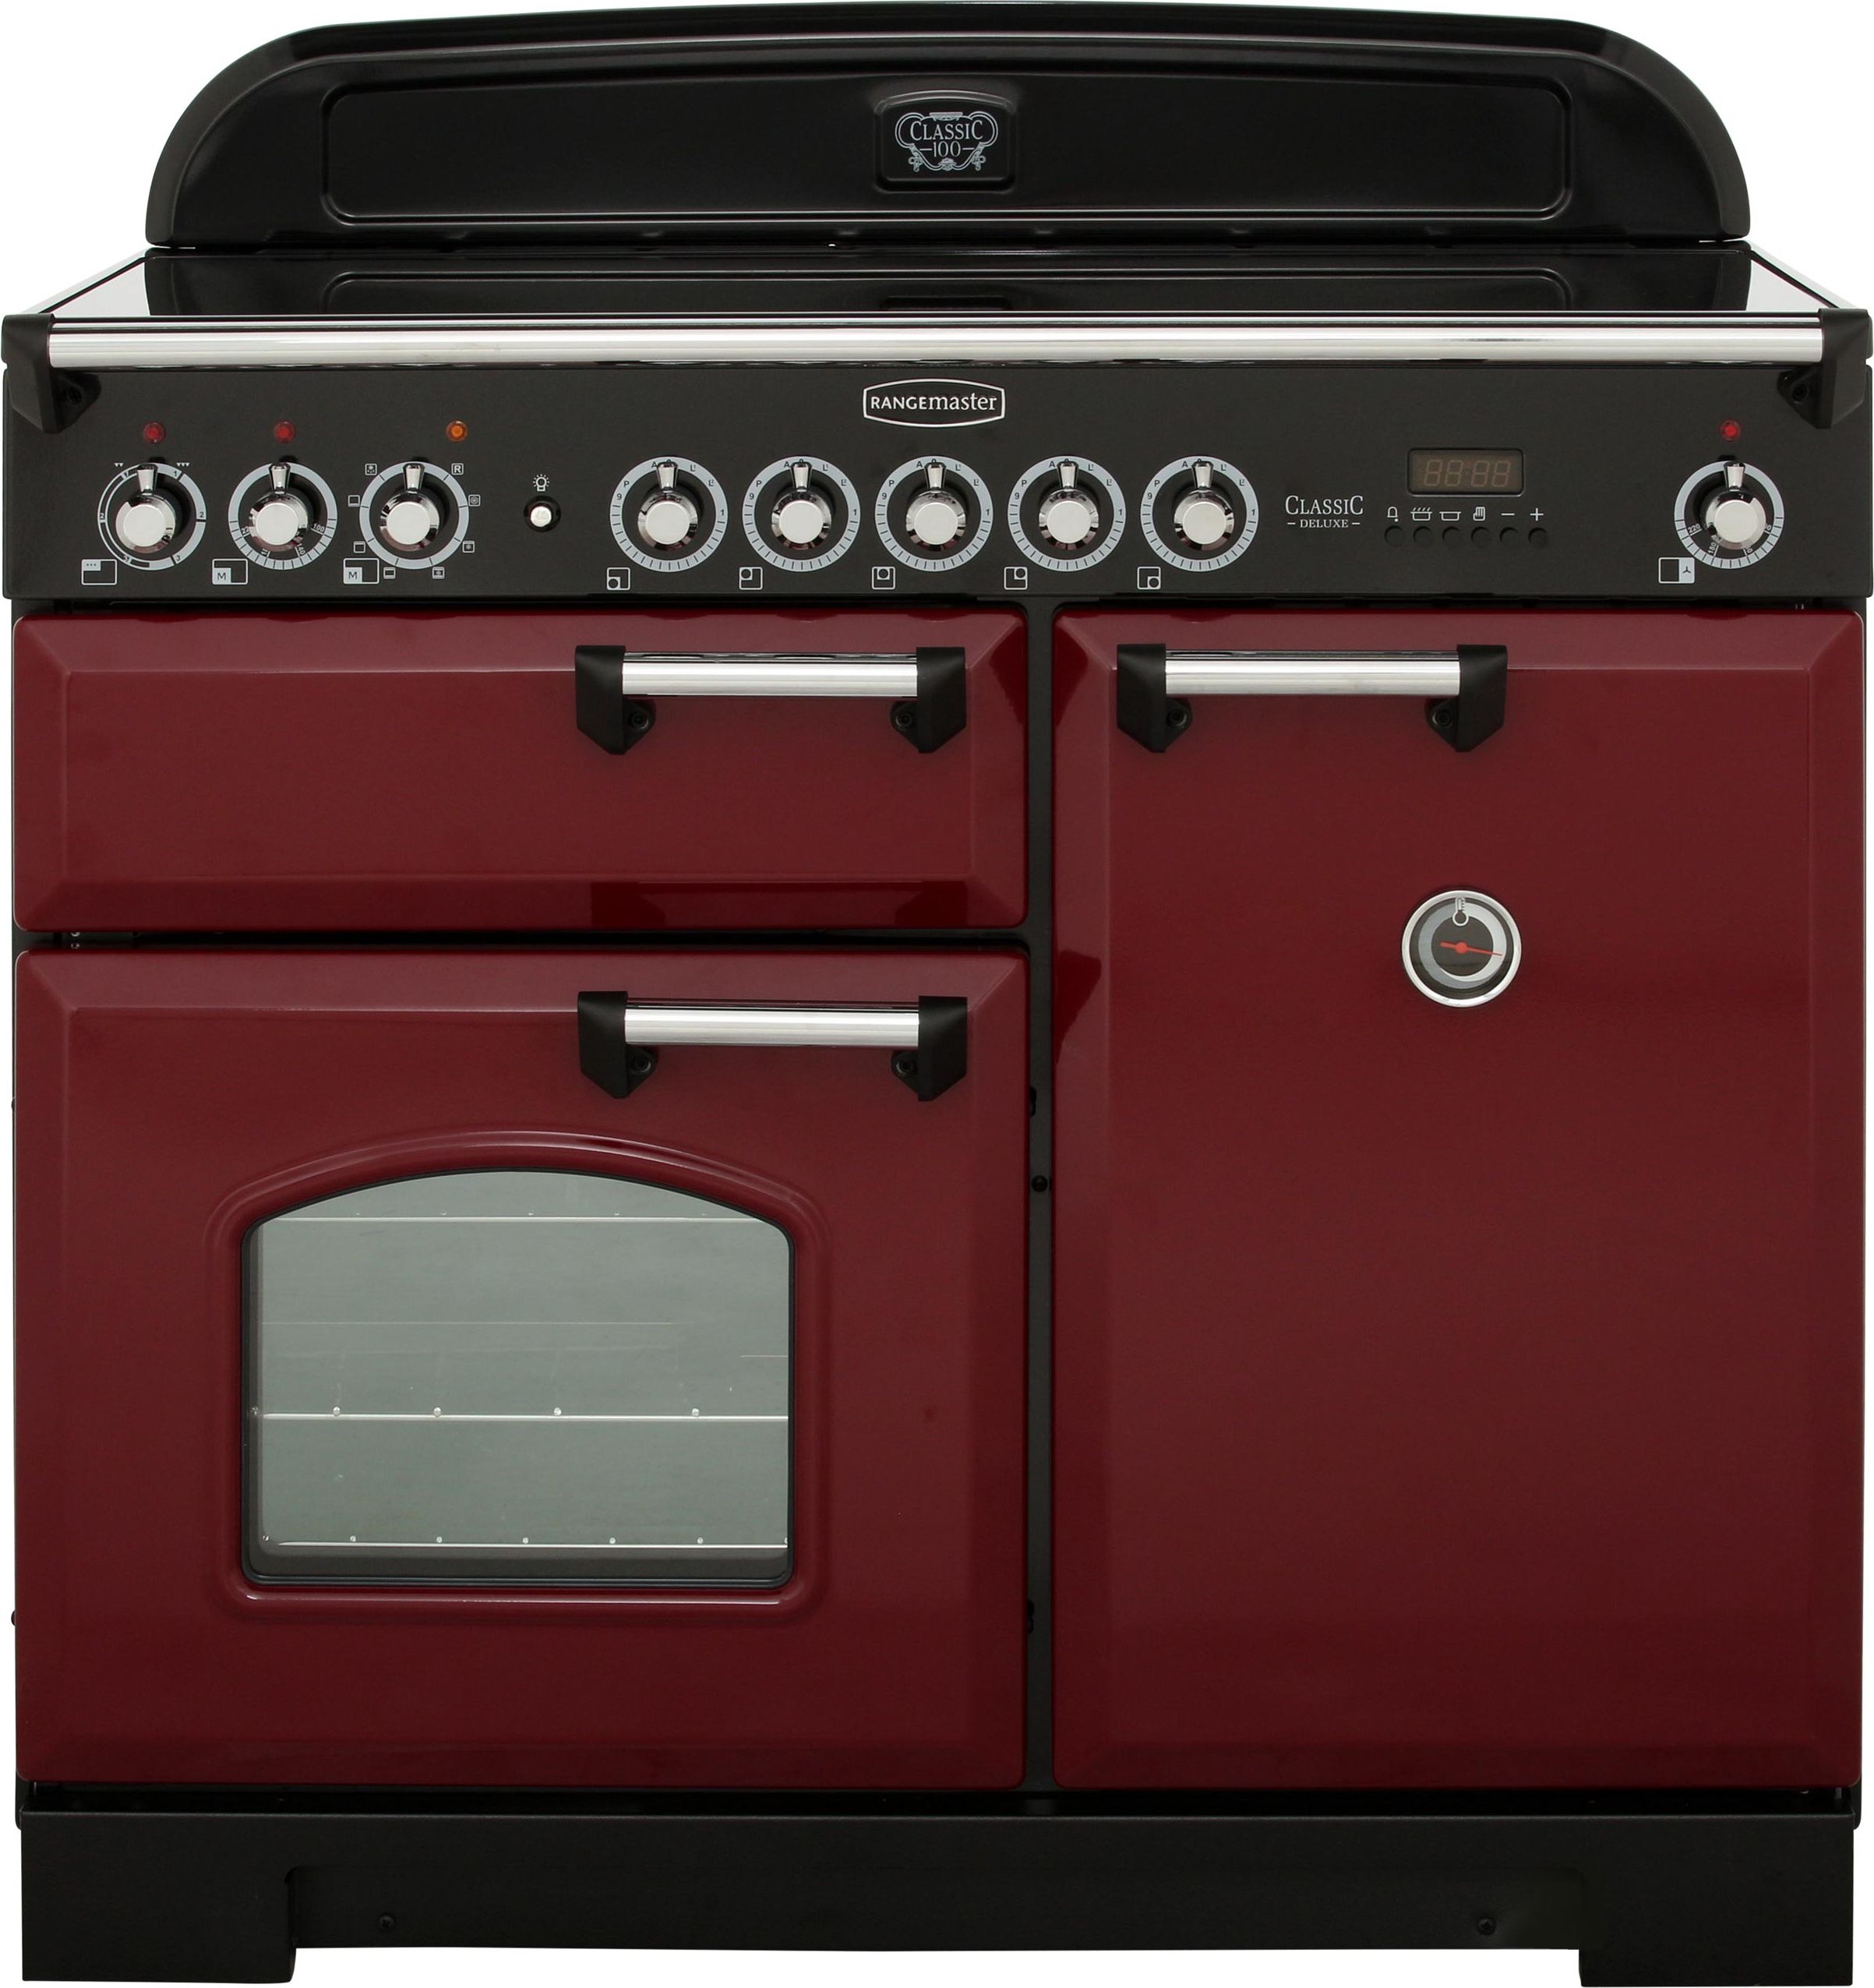 Rangemaster Classic Deluxe CDL100EICY/C 100cm Electric Range Cooker with Induction Hob - Cranberry / Chrome - A/A Rated, Red